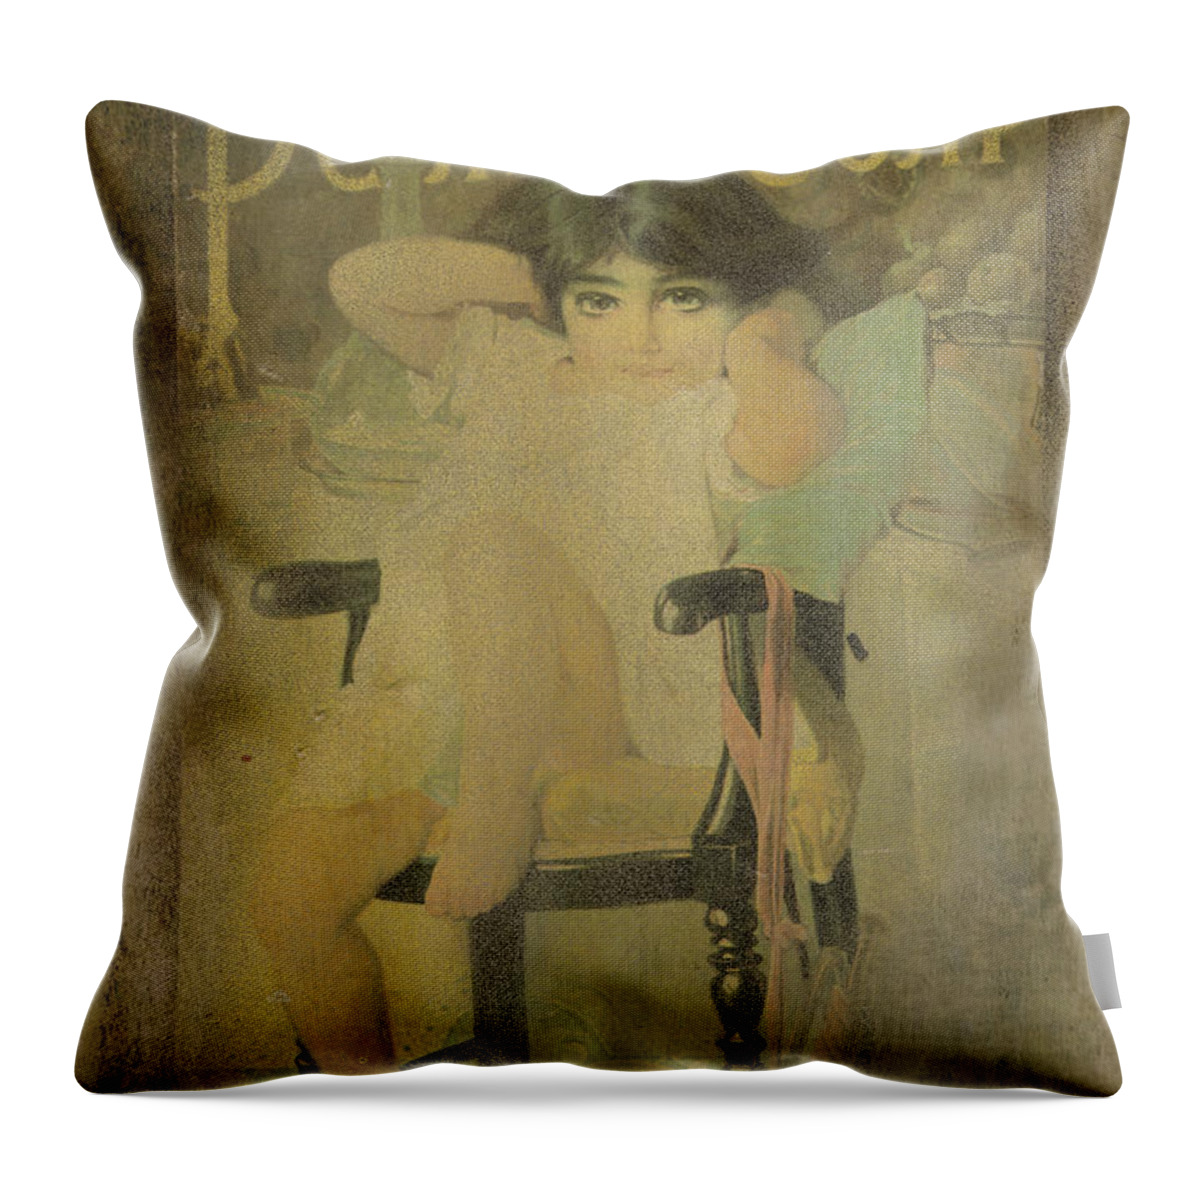 Vintage Throw Pillow featuring the photograph Pear Soap Girl by Betty LaRue